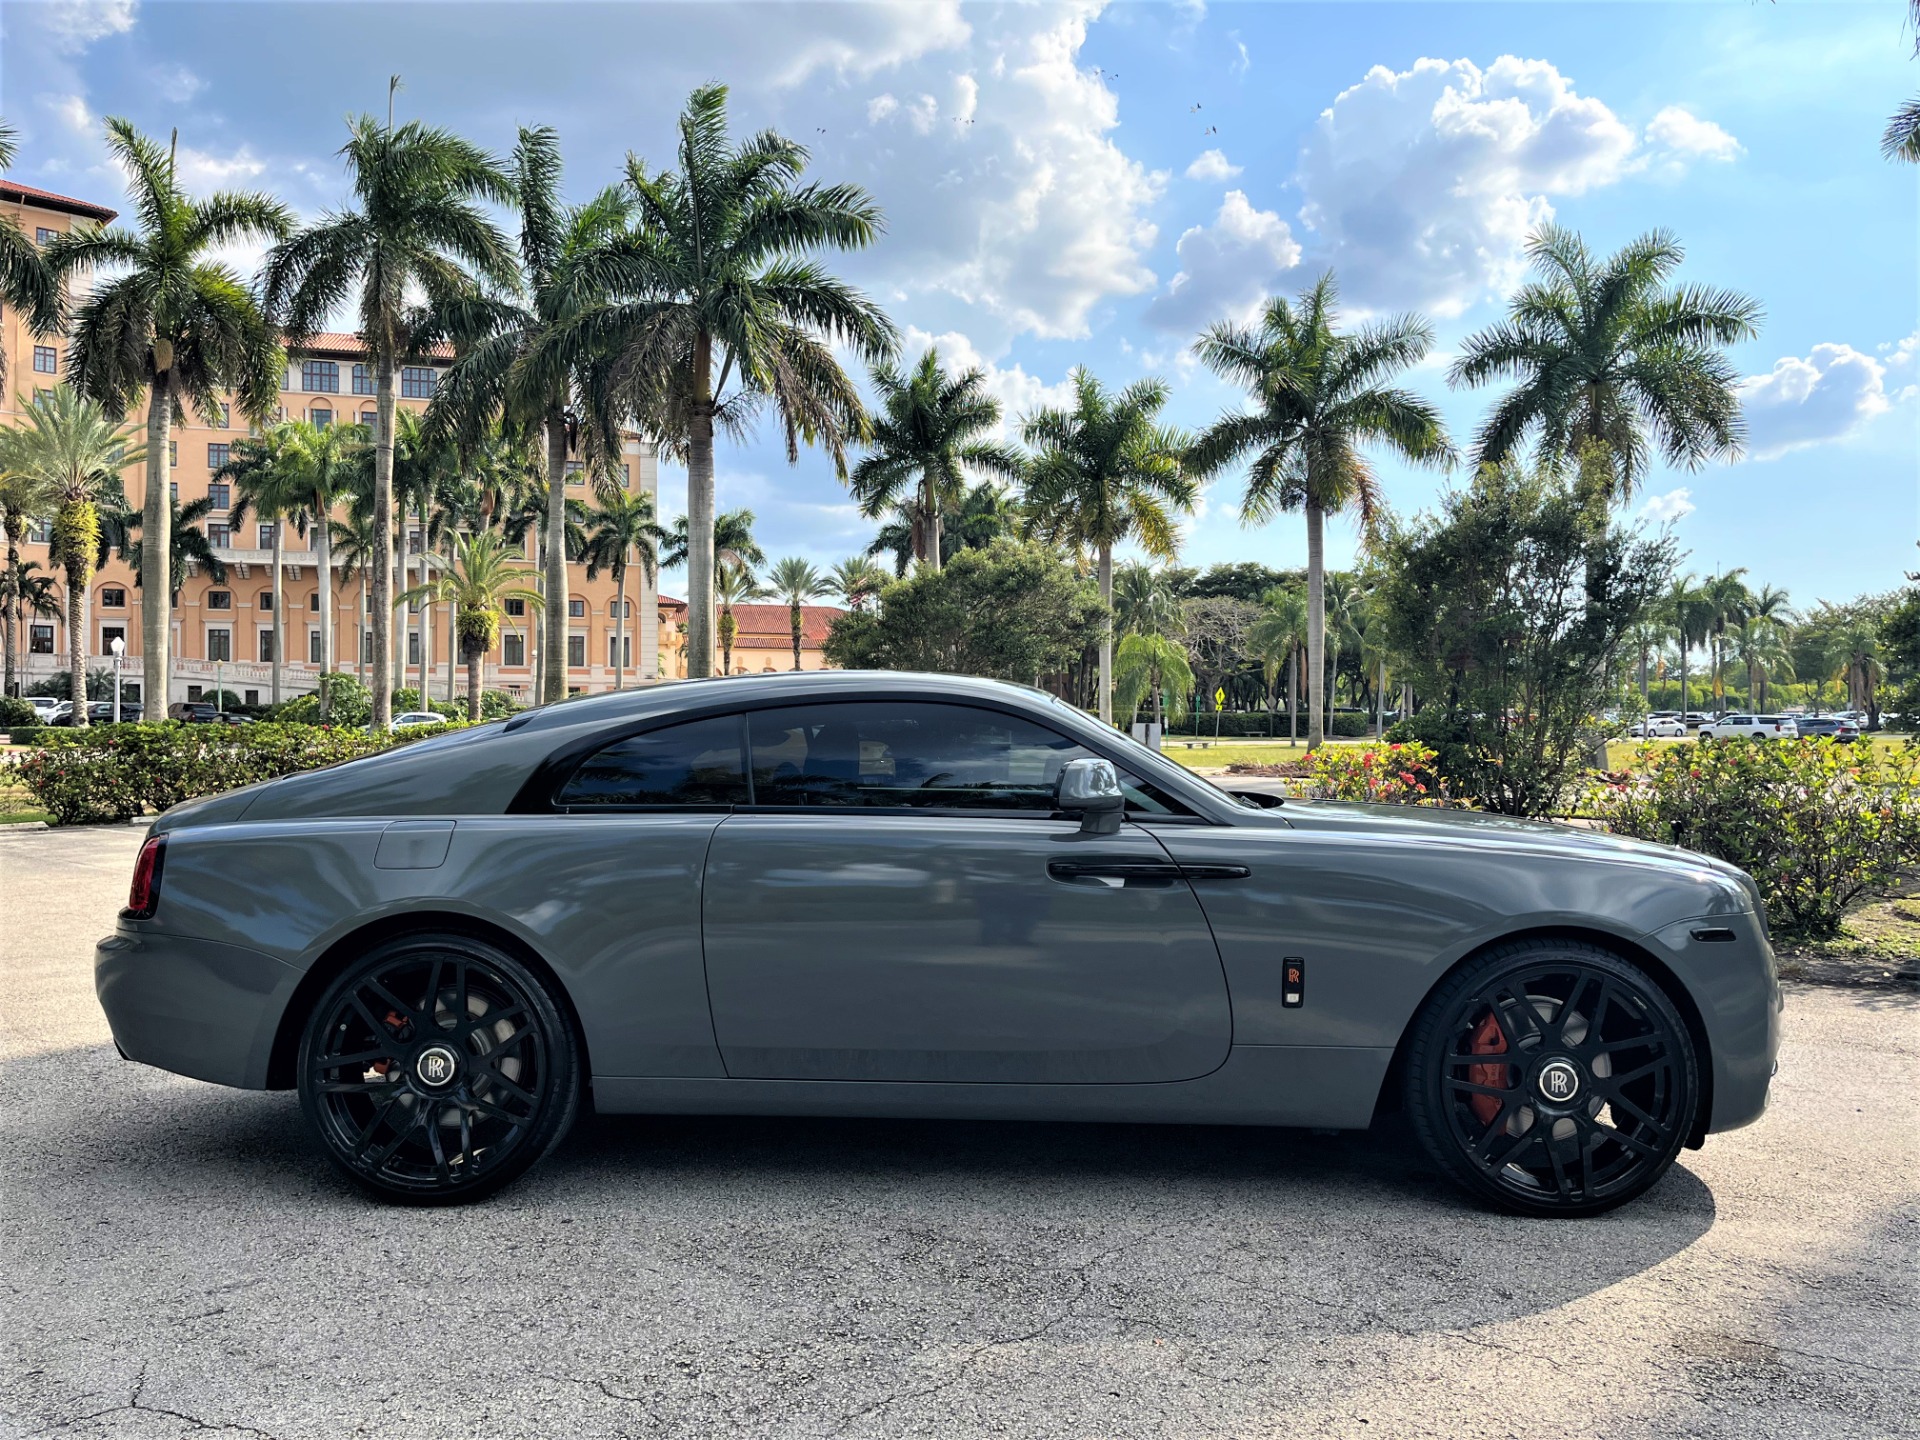 Used 2015 Rolls-Royce Wraith for sale Sold at The Gables Sports Cars in Miami FL 33146 3